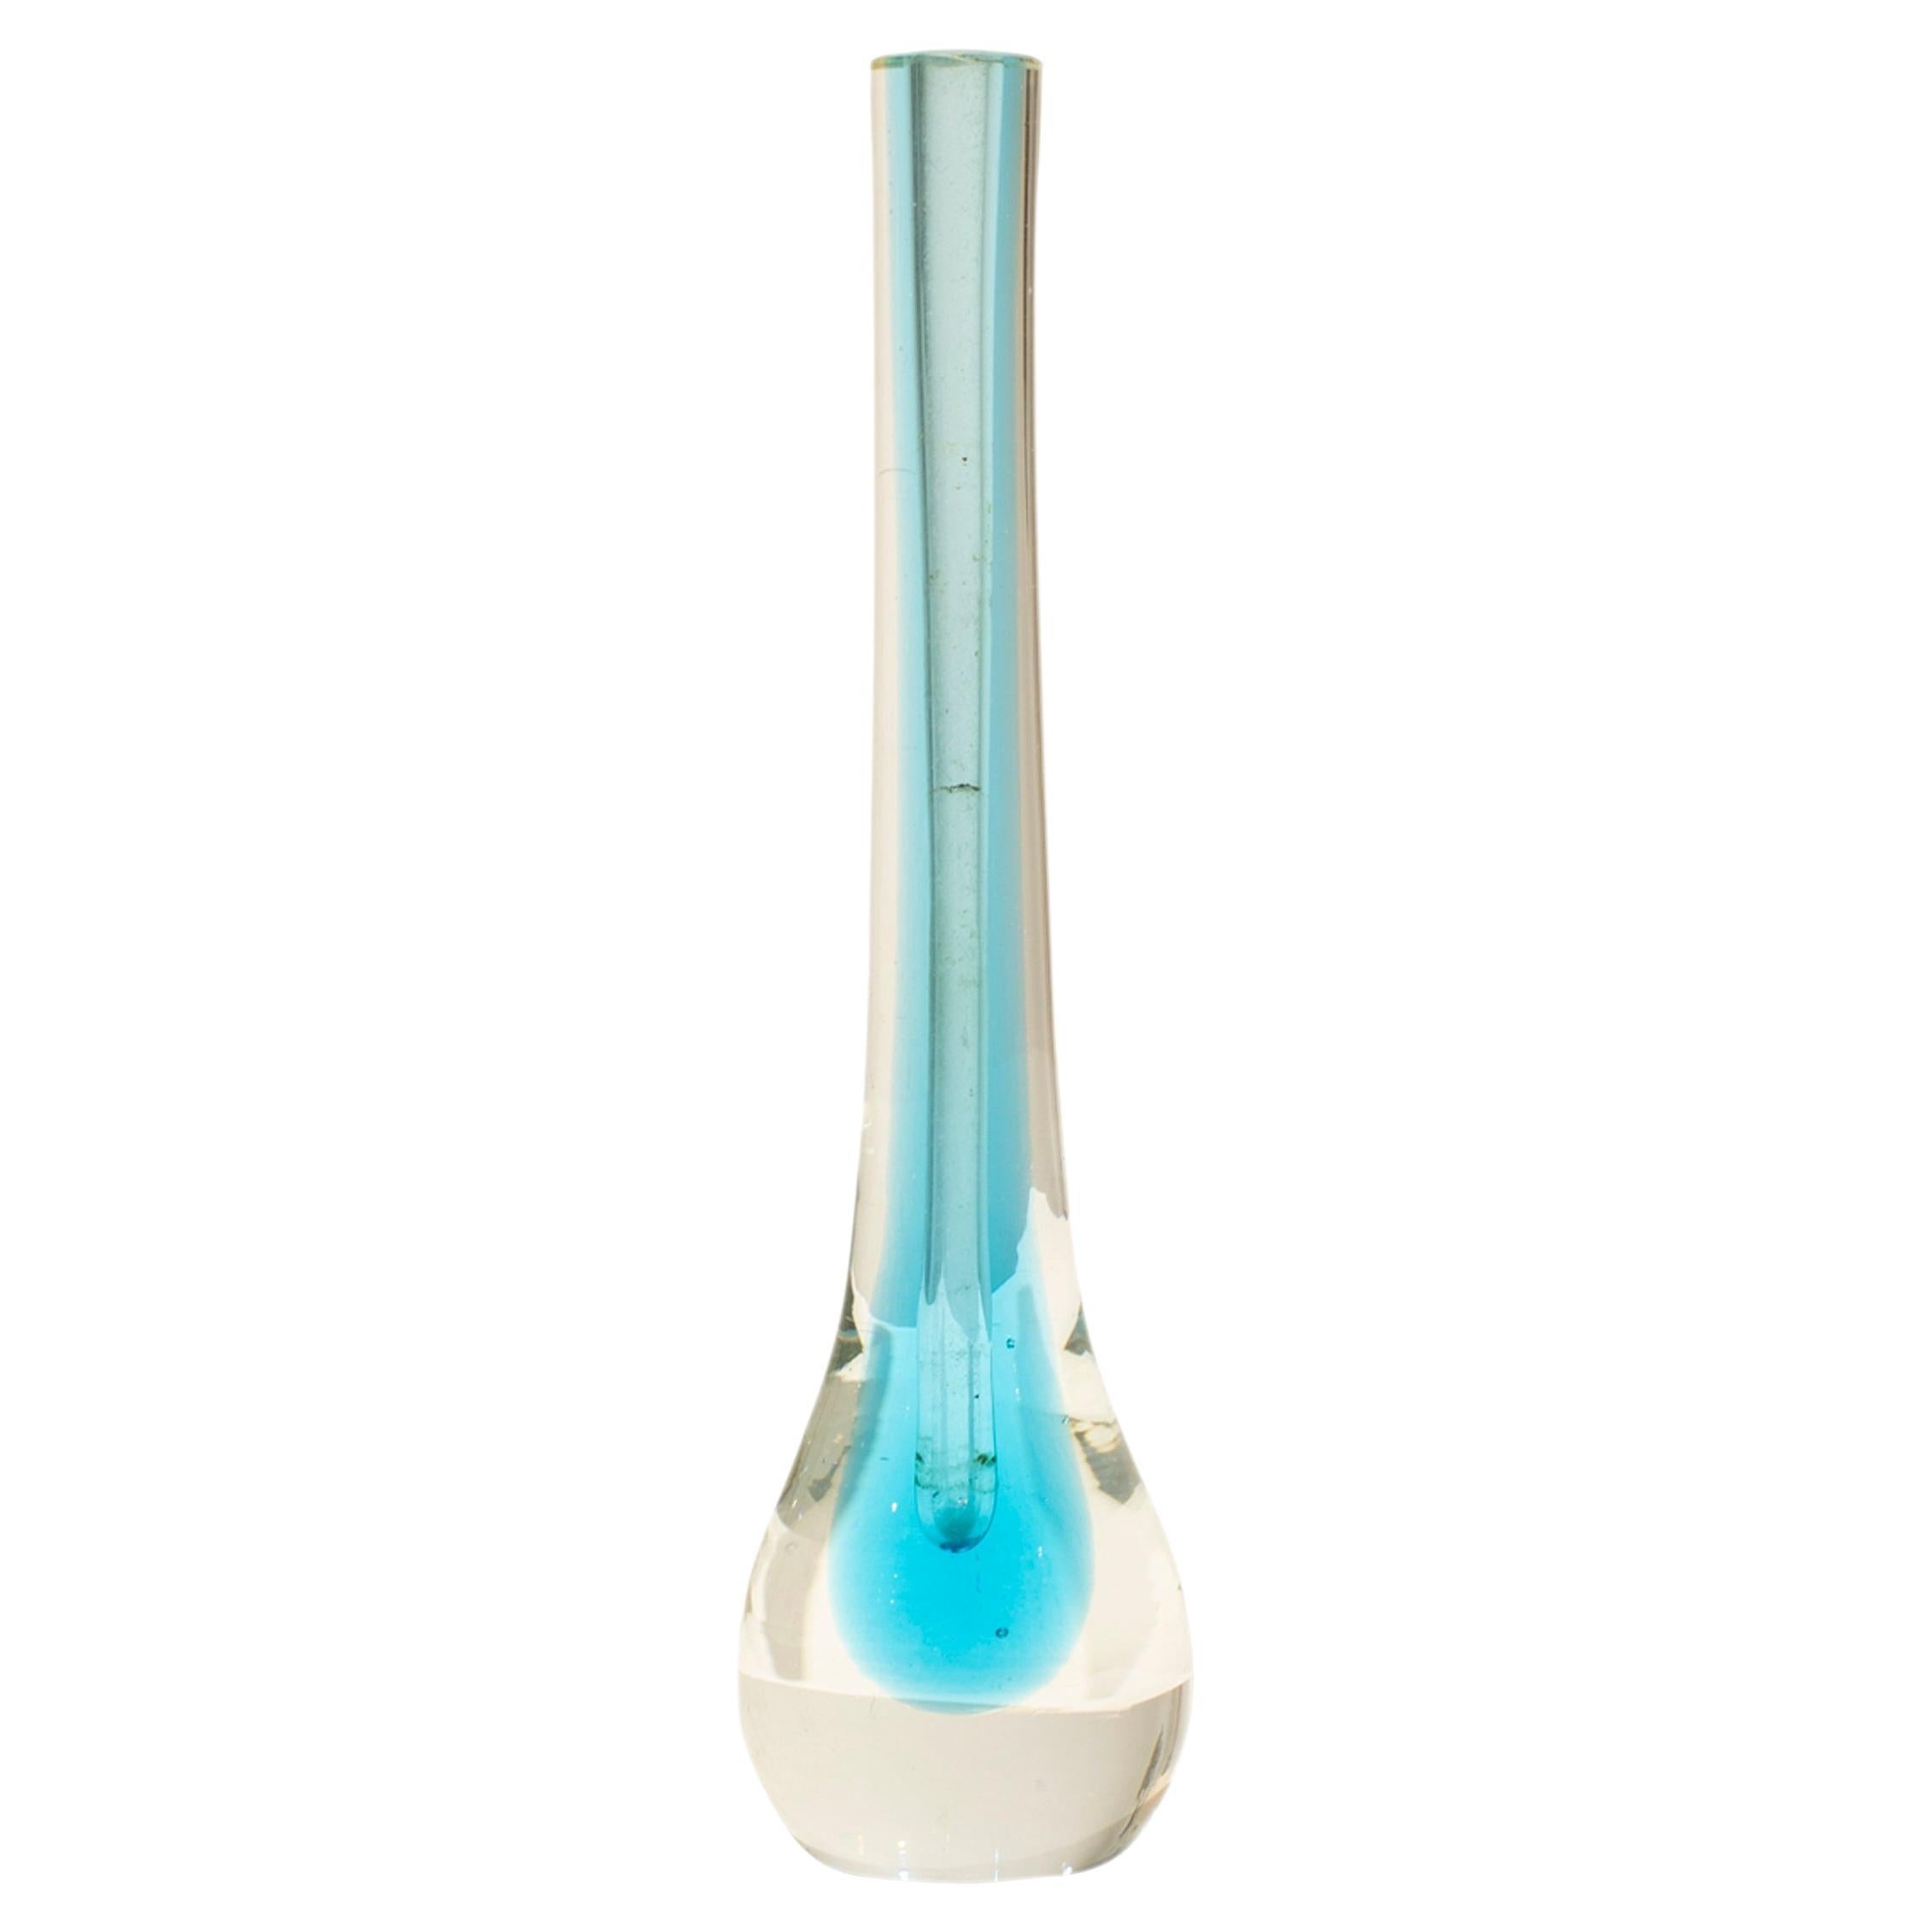 Flavio Poli Hand-Crafted Blue Murano Small Glass Vase, Italy, 1970 For Sale